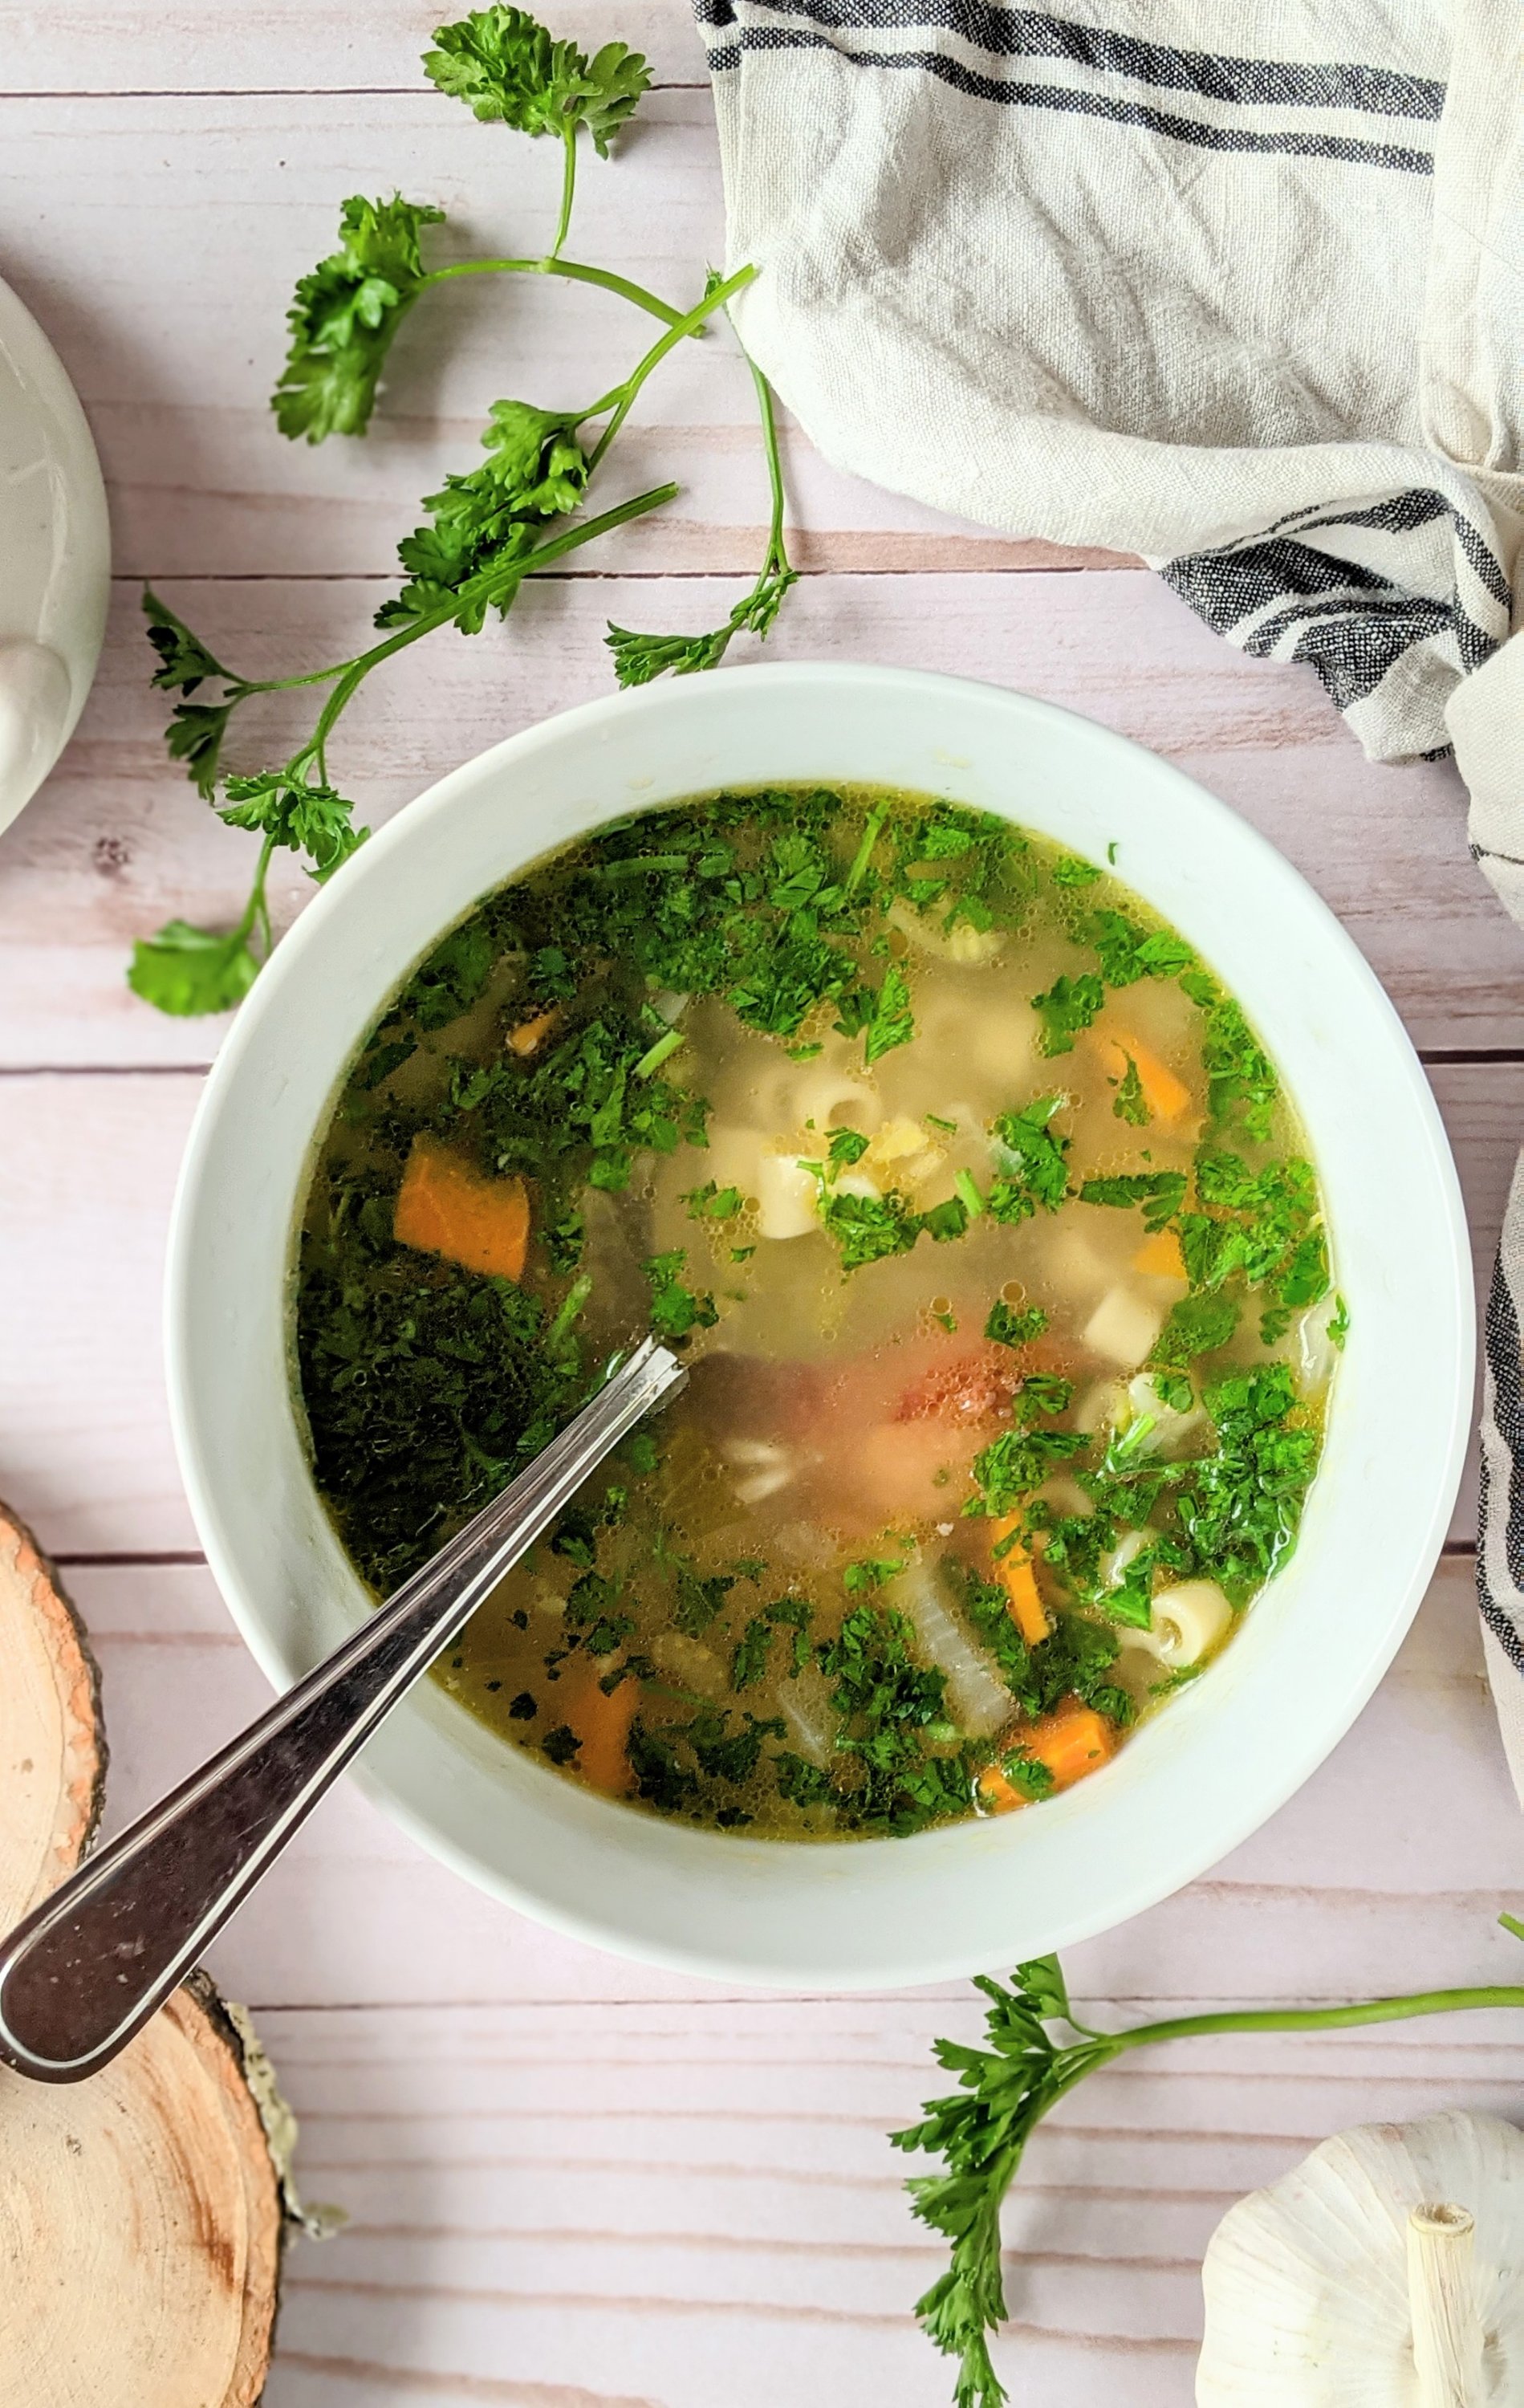 parsley noodle soup recipe healthy recipes with parsley for dinner parsley as a main dish parsley in soups parsley broth for soup healthy recipes with parsley not salad parsley soup recipe vegan gluten free vegetarian